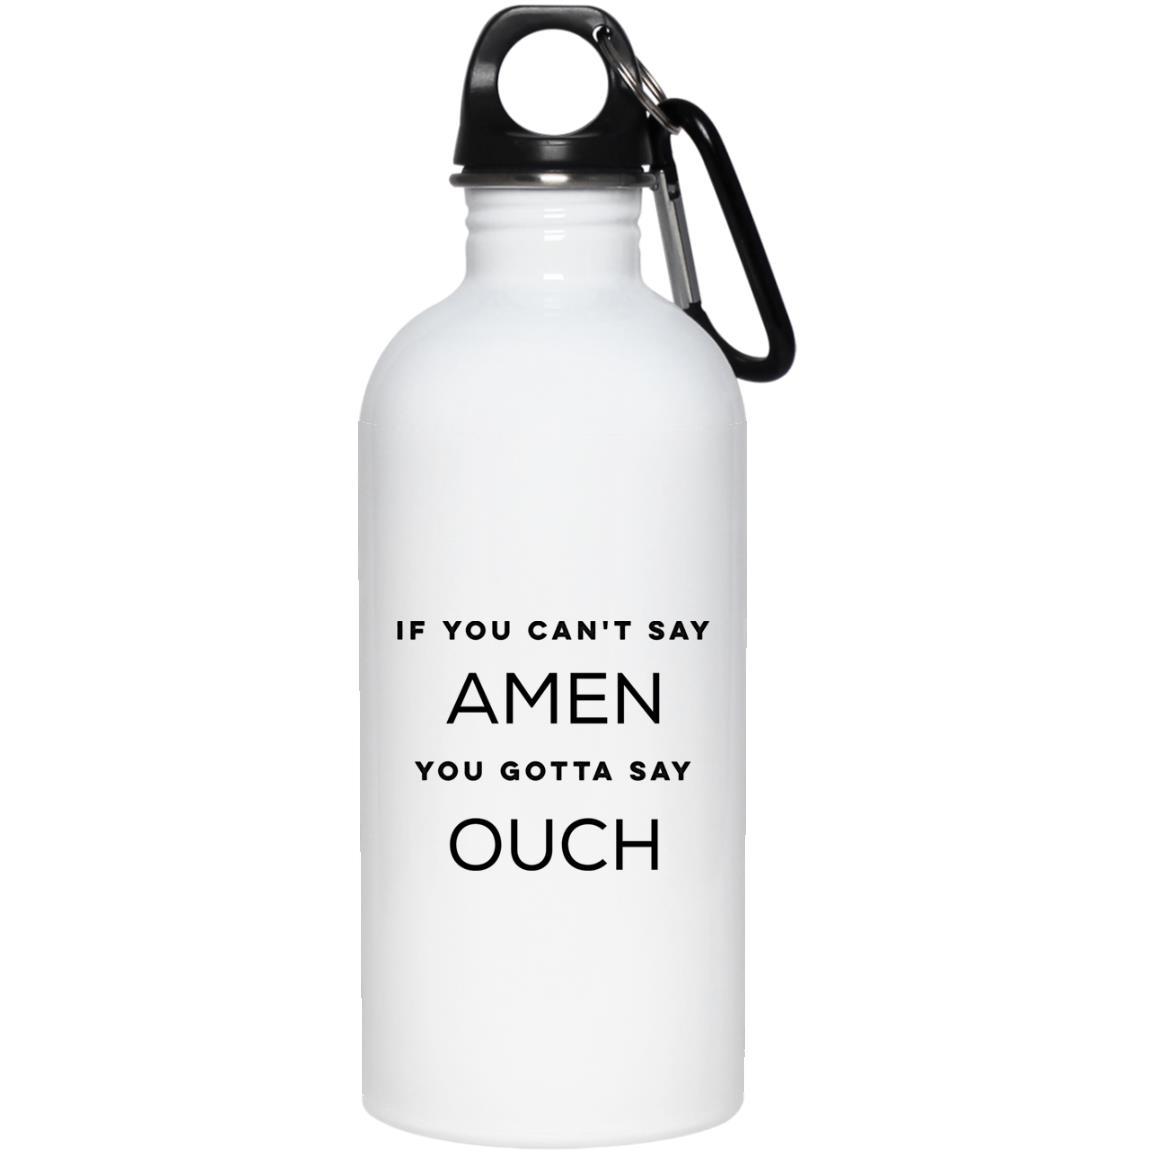 If You Can't Say Amen (20oz Steel Water Bottle) - SDG Clothing